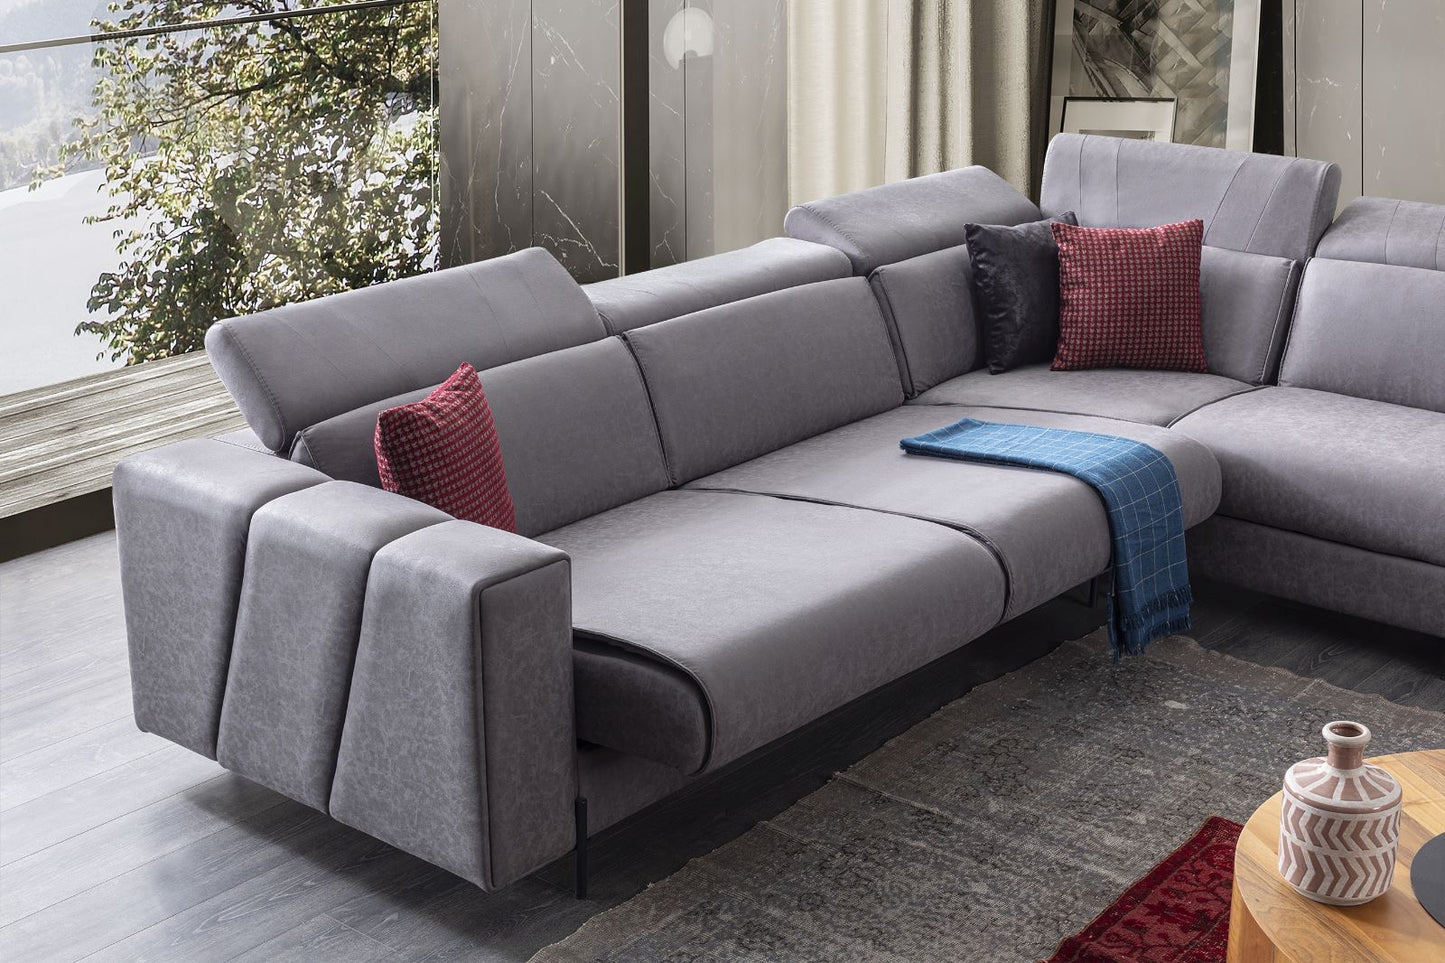 G-LR PANAHILL SECTIONAL LIVING ROOM SETTEE